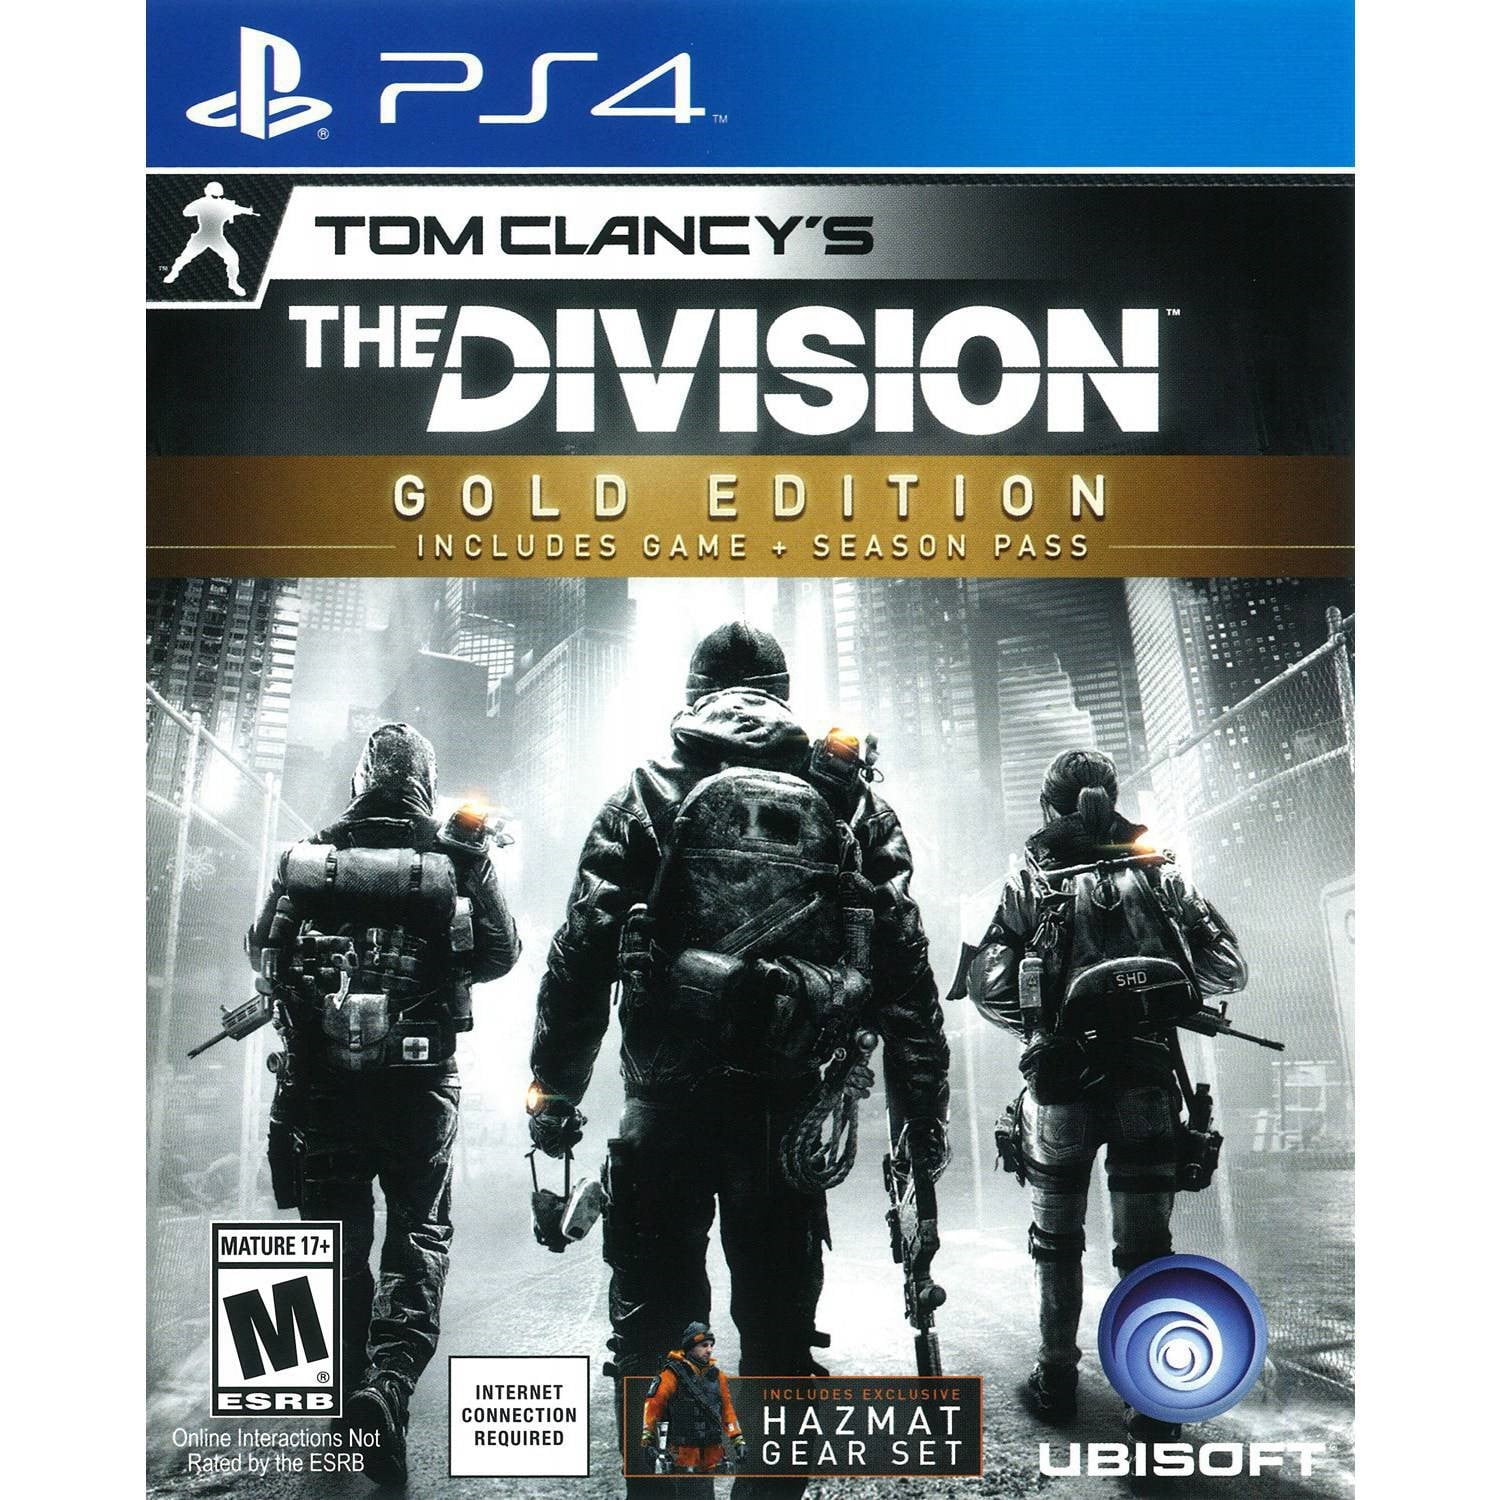 The division ps4. The Division 2 – Gold Edition ps4. Tom Clancy's the Division Gold Edition что входит. Призрачный дивизион ps4.